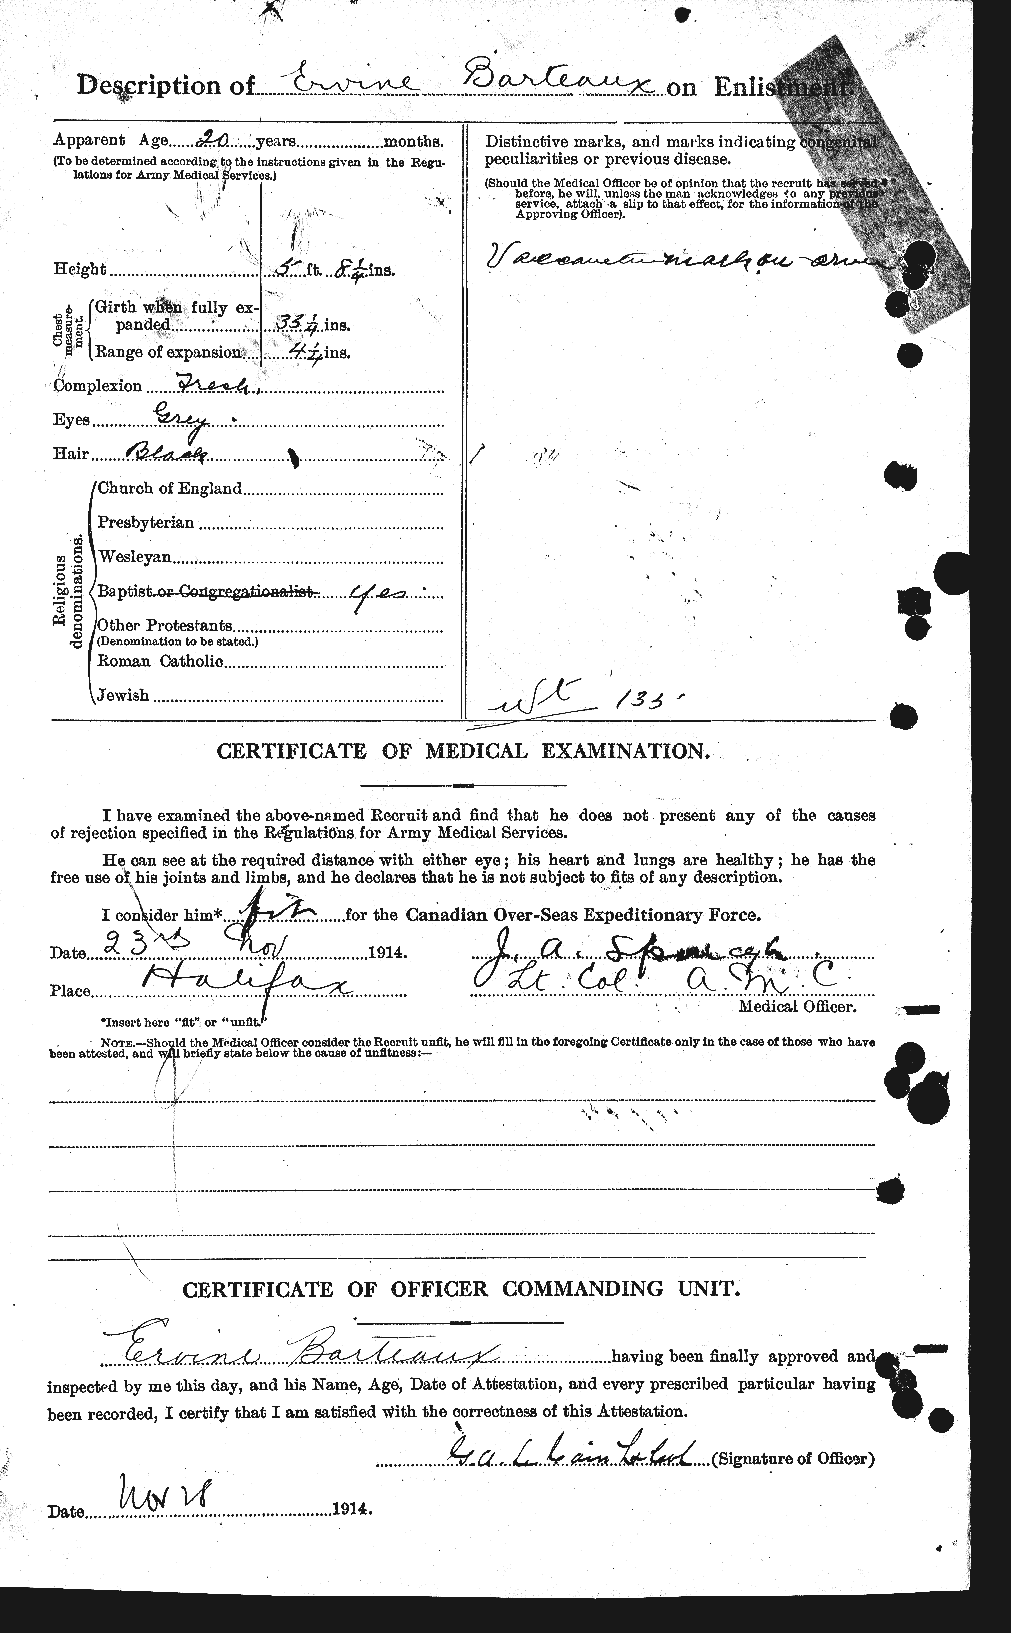 Personnel Records of the First World War - CEF 227728b